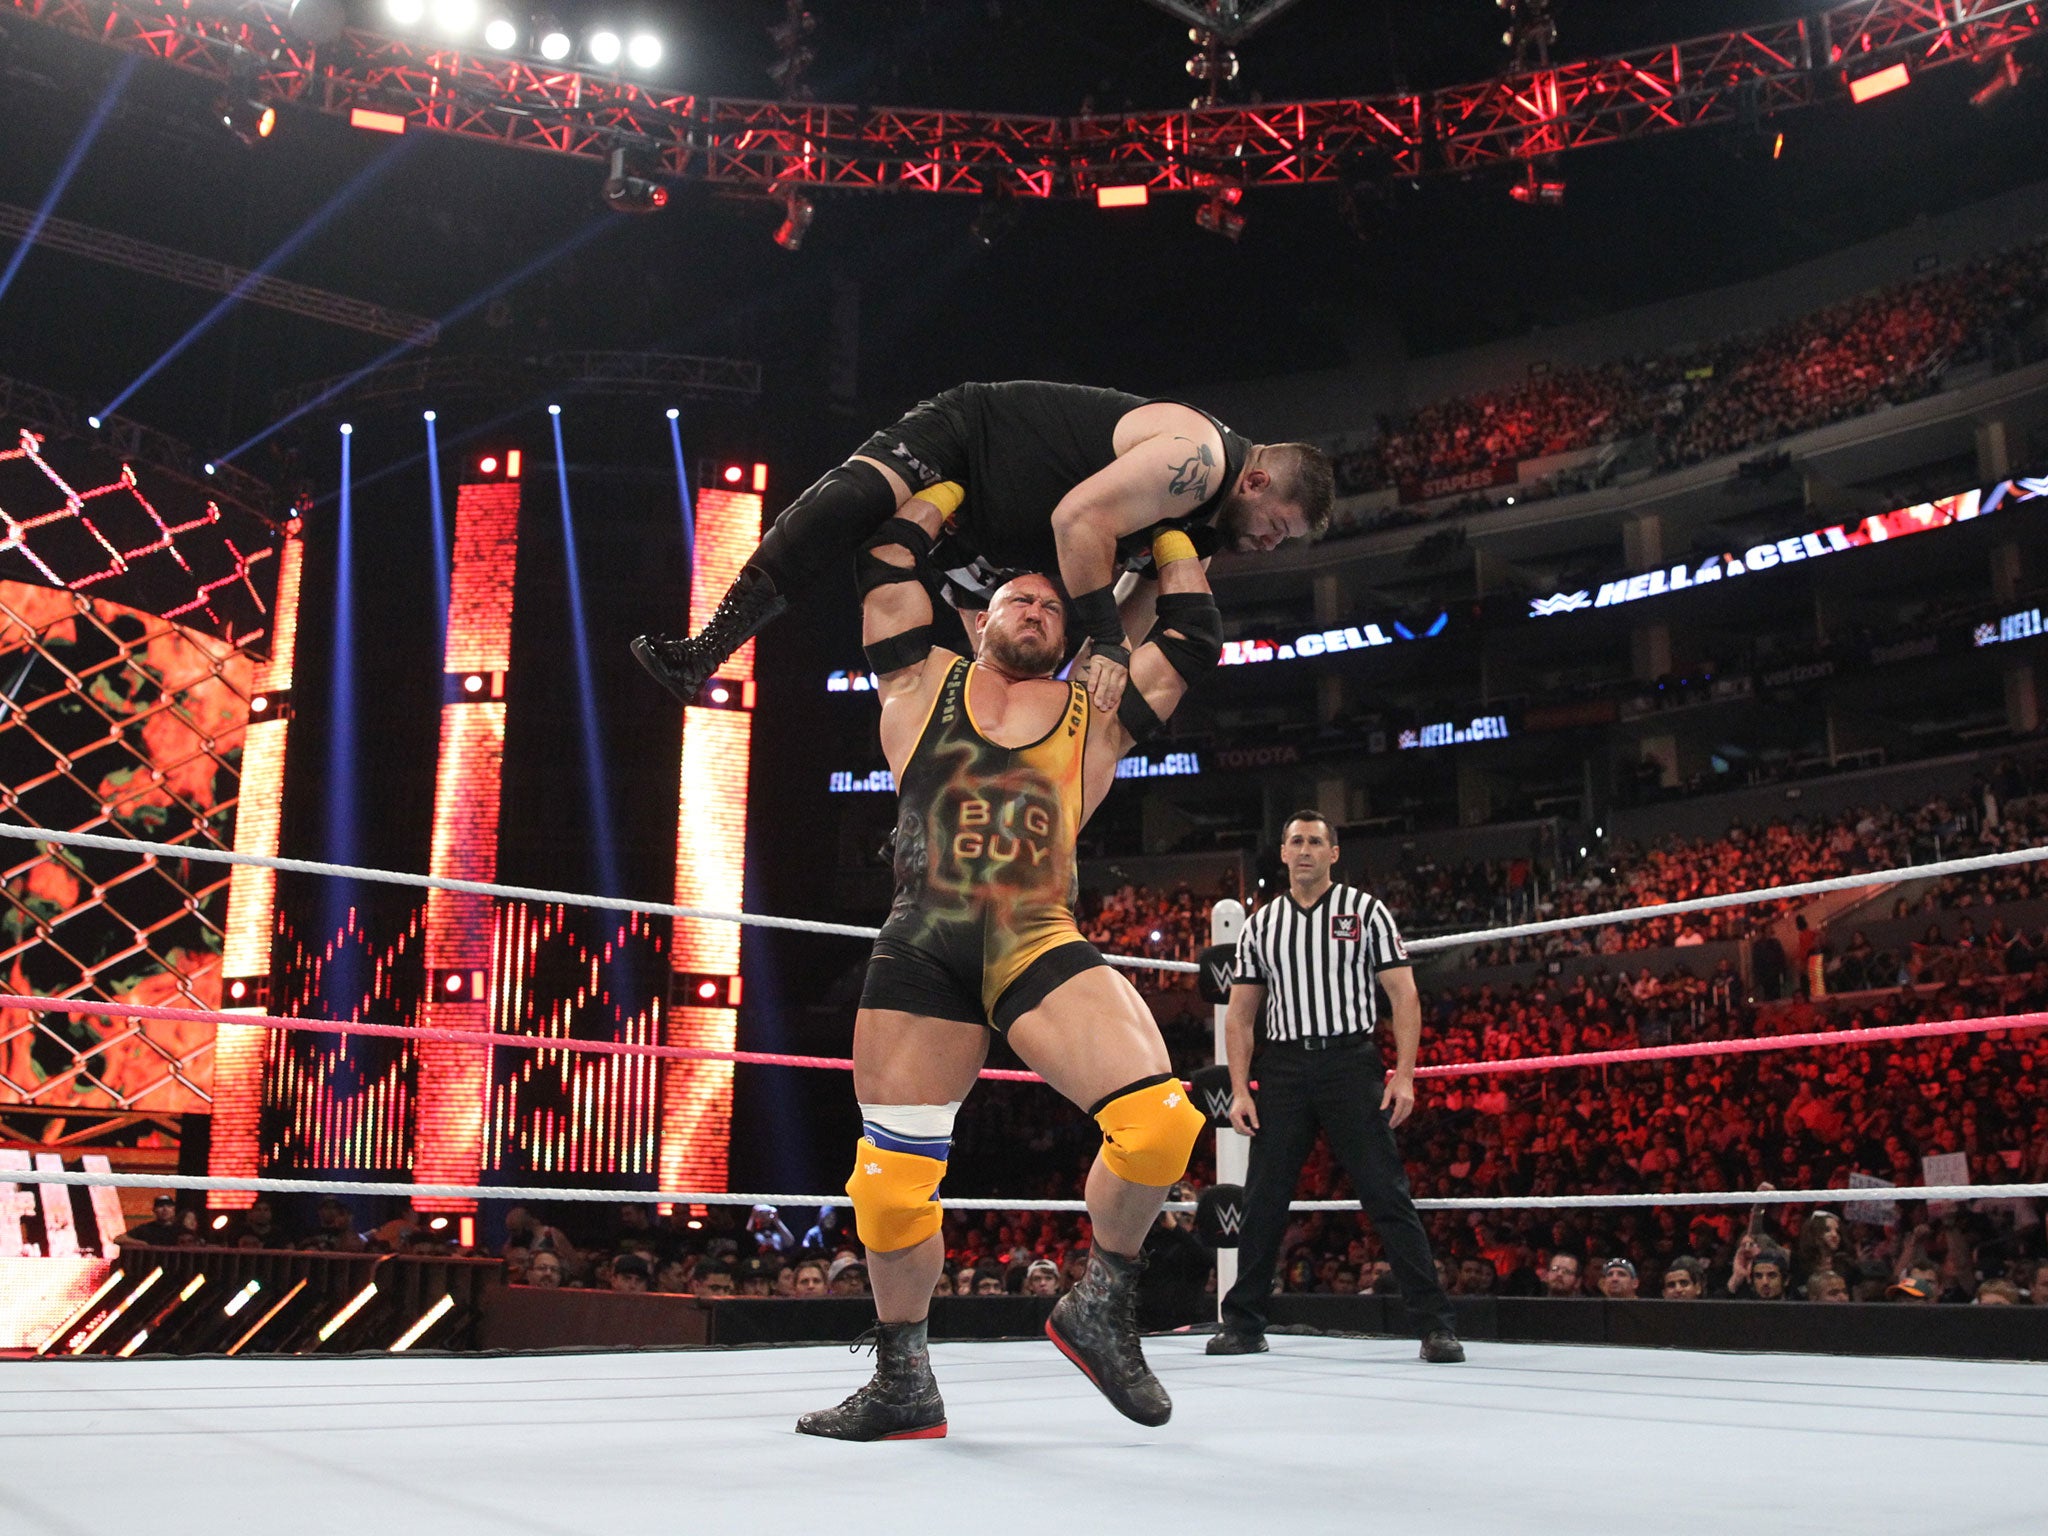 Ryback presses Kevin Owens into the air in a show of brute strength